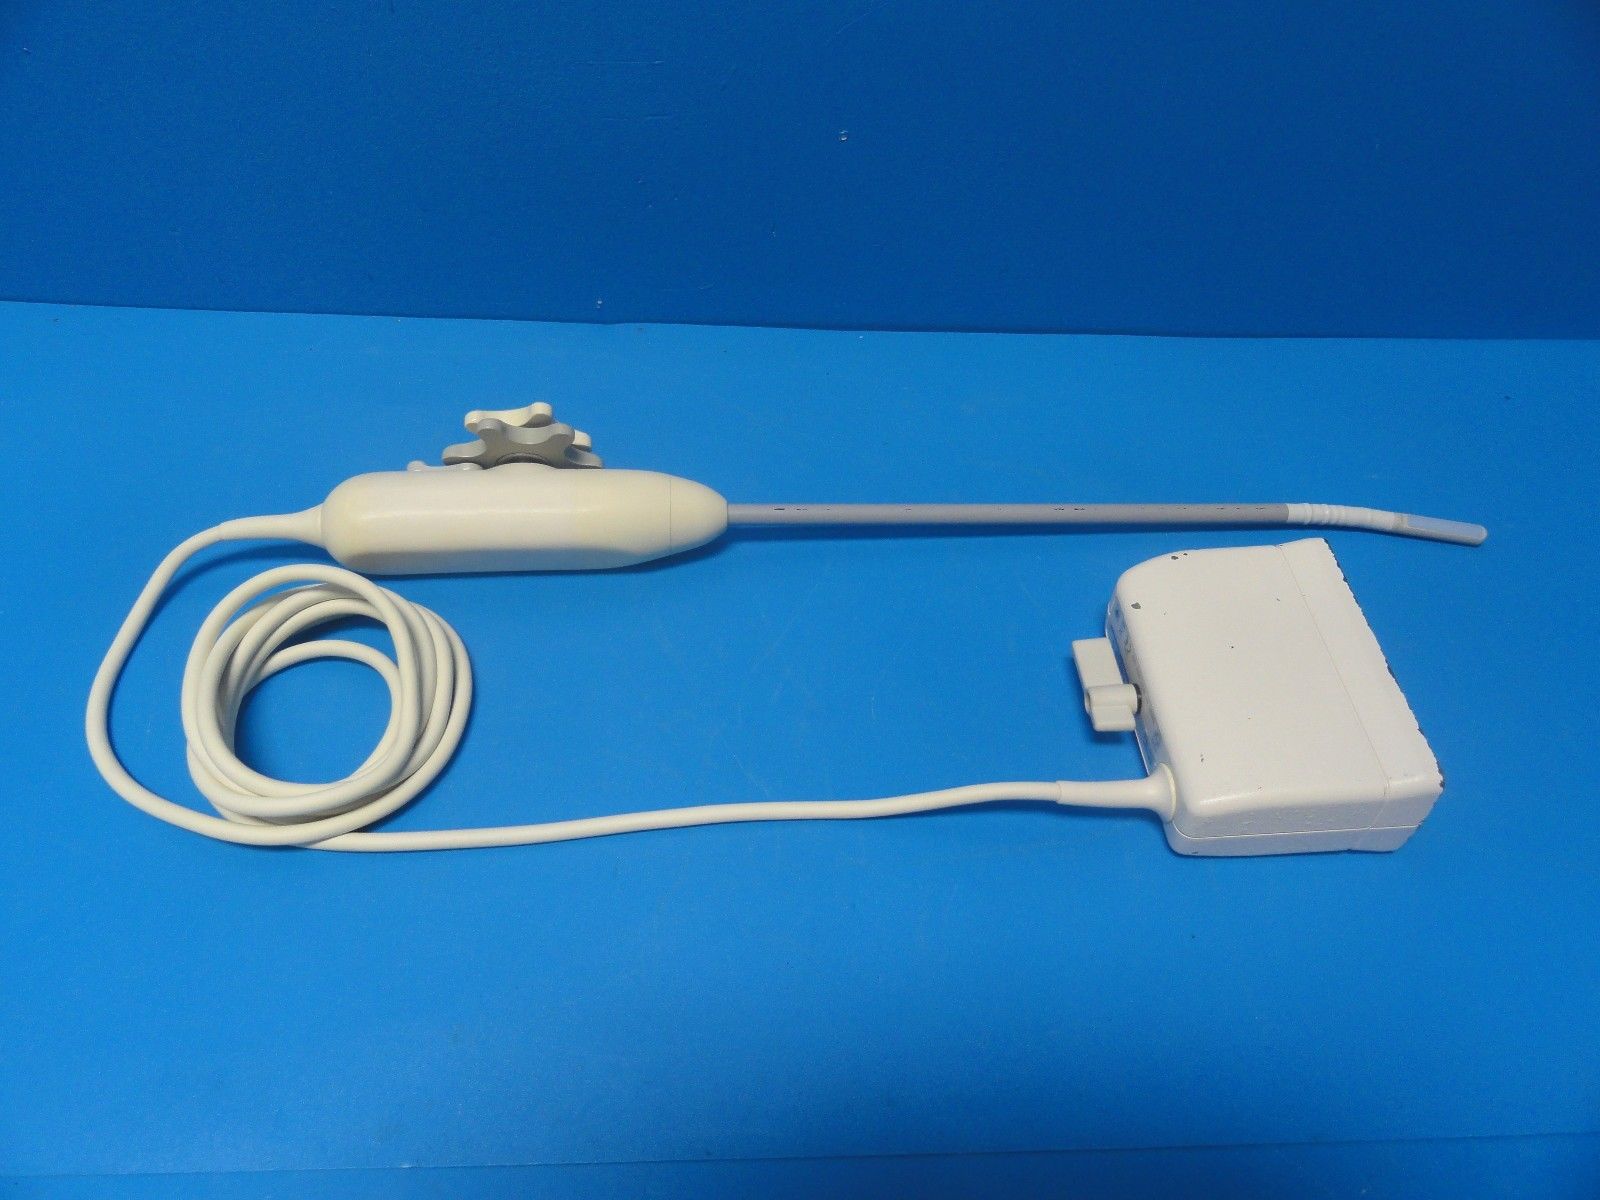 Philips ATL LAP L9-5 Entos Broadband Phased Linear Array Laprasocpic Probe (6843 DIAGNOSTIC ULTRASOUND MACHINES FOR SALE